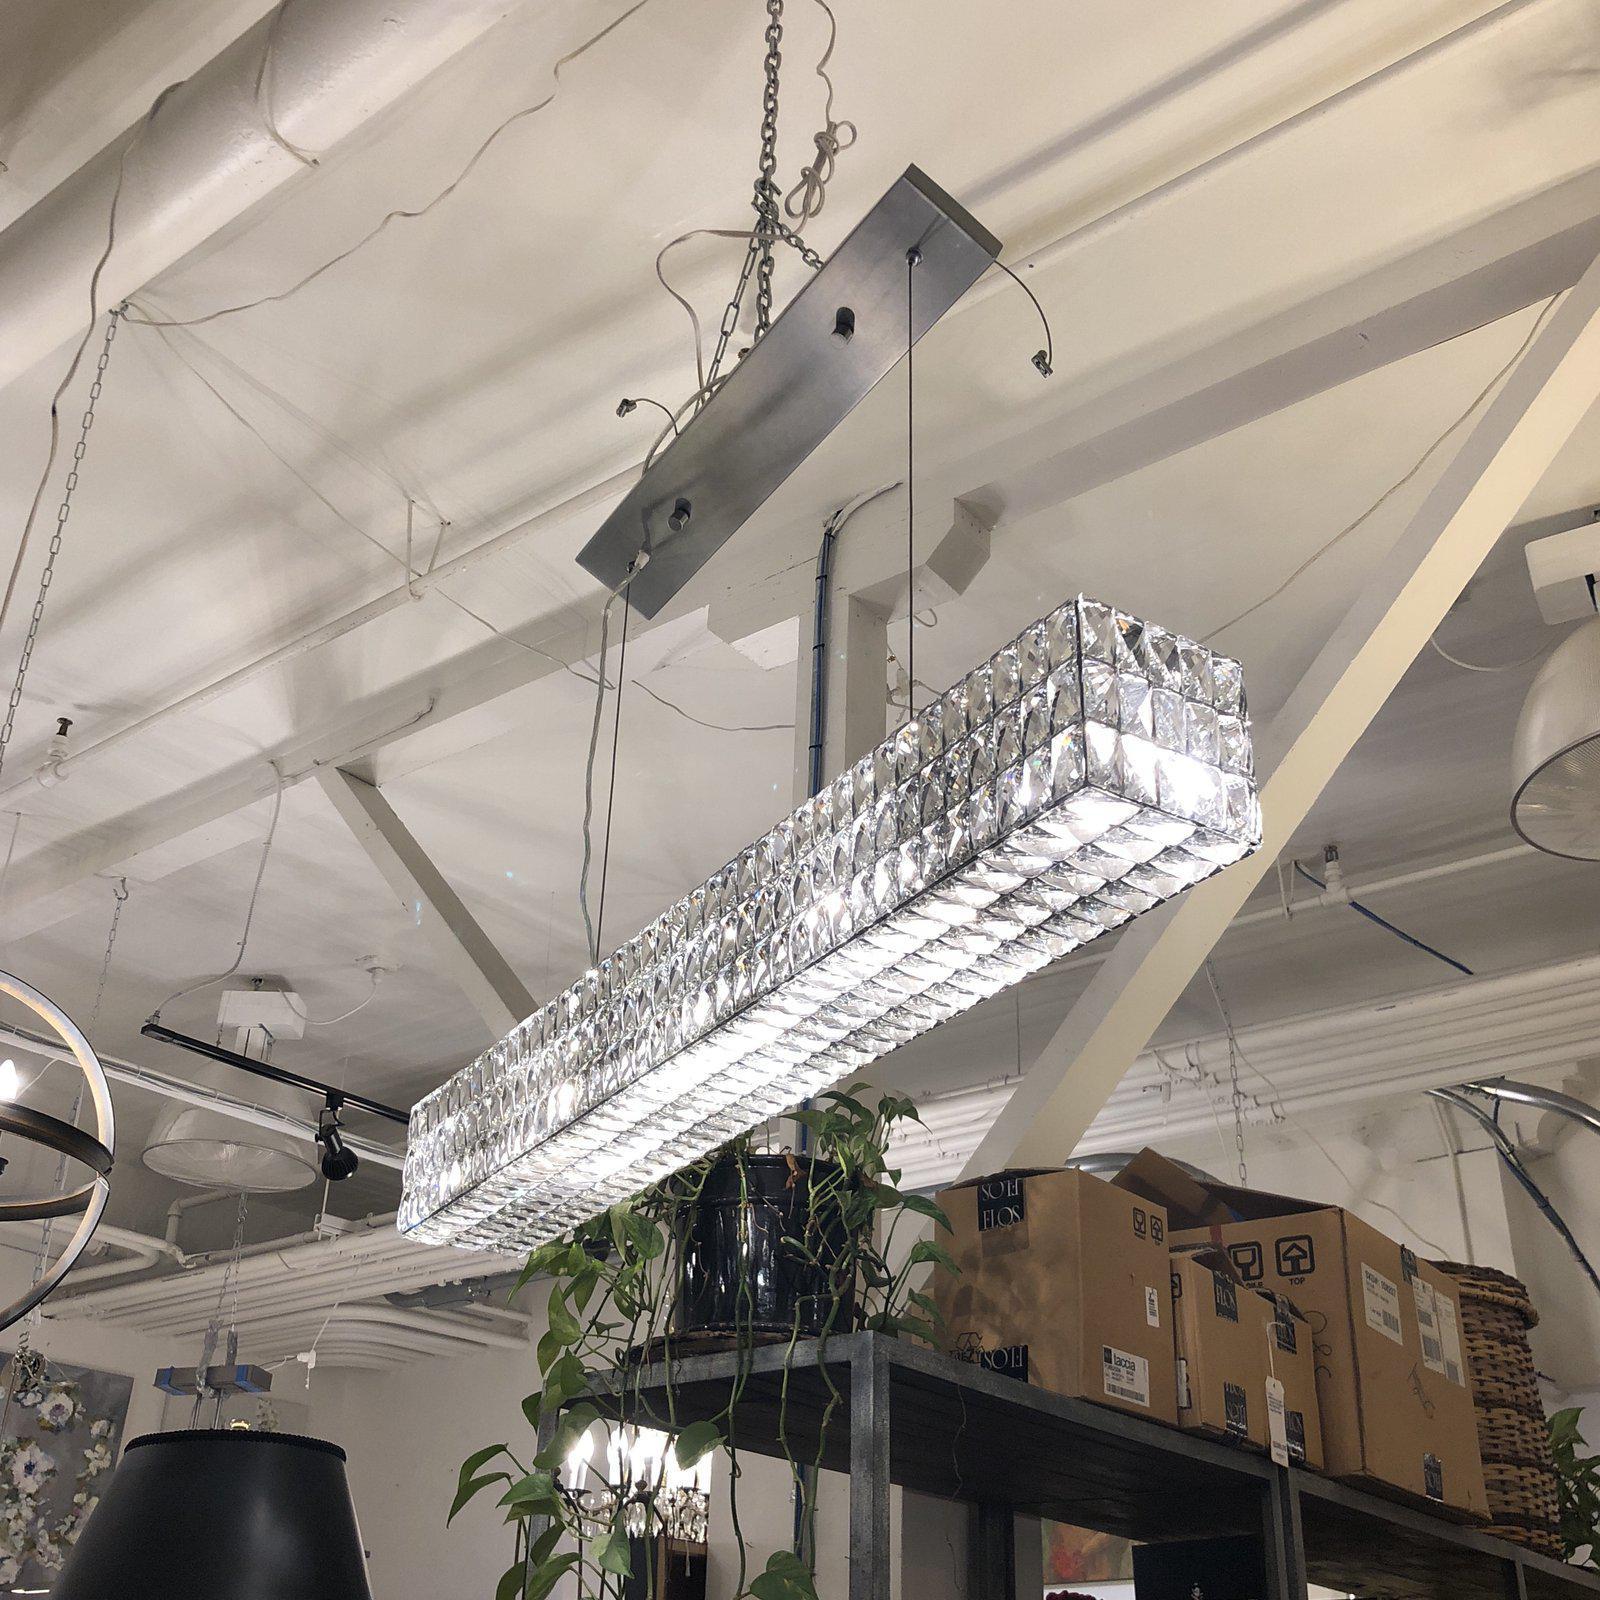 Presents this stunning restoration hardware spiridon linear chandelier. Mirroring the luxe design of 1960s Austrian lighting, the fixture's faceted crystals are hand-set within a matte iron frame and suspended from slender wires. Bring all your